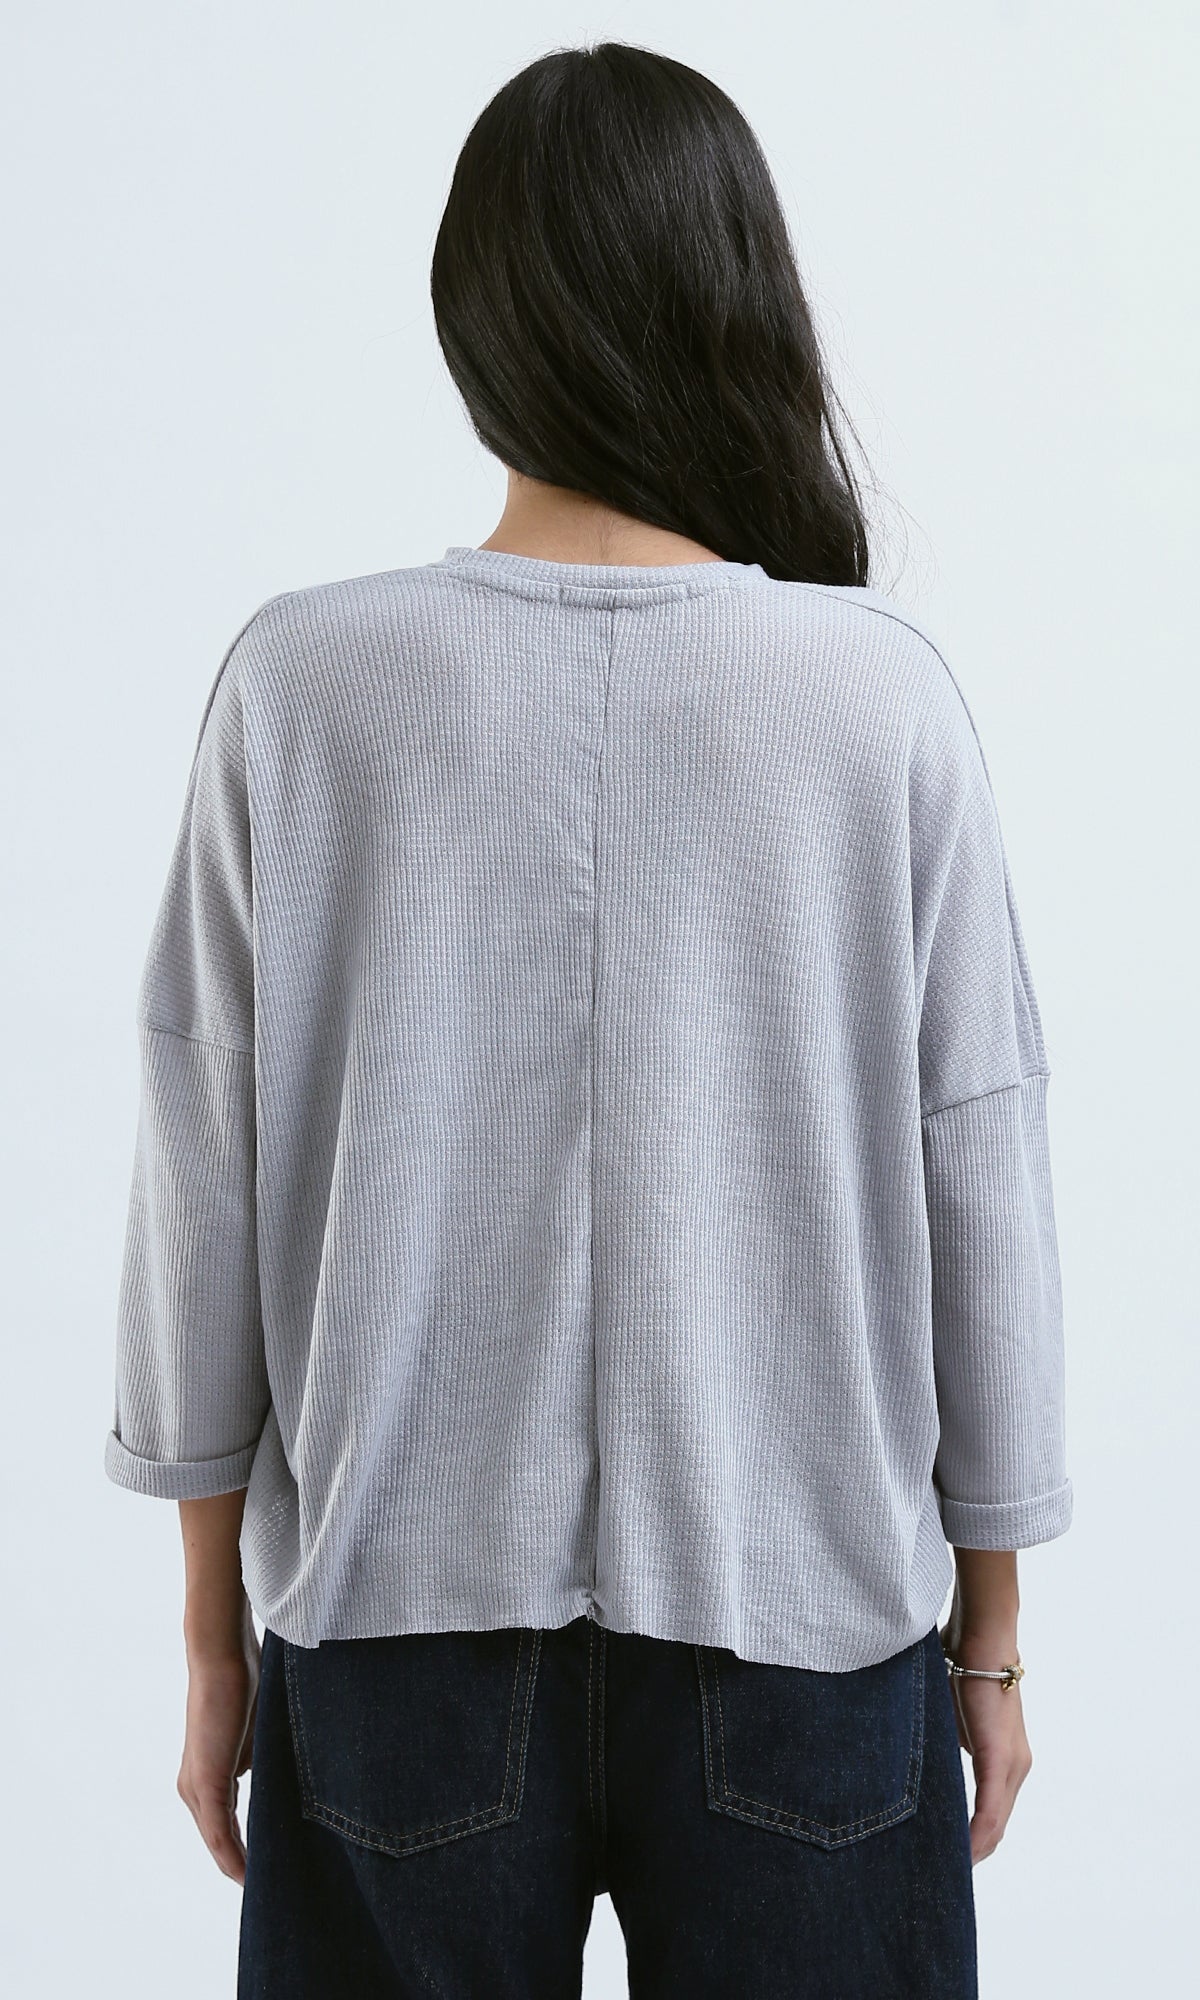 O179650 Self Patterned Light Grey Top With 3/4 Sleeves